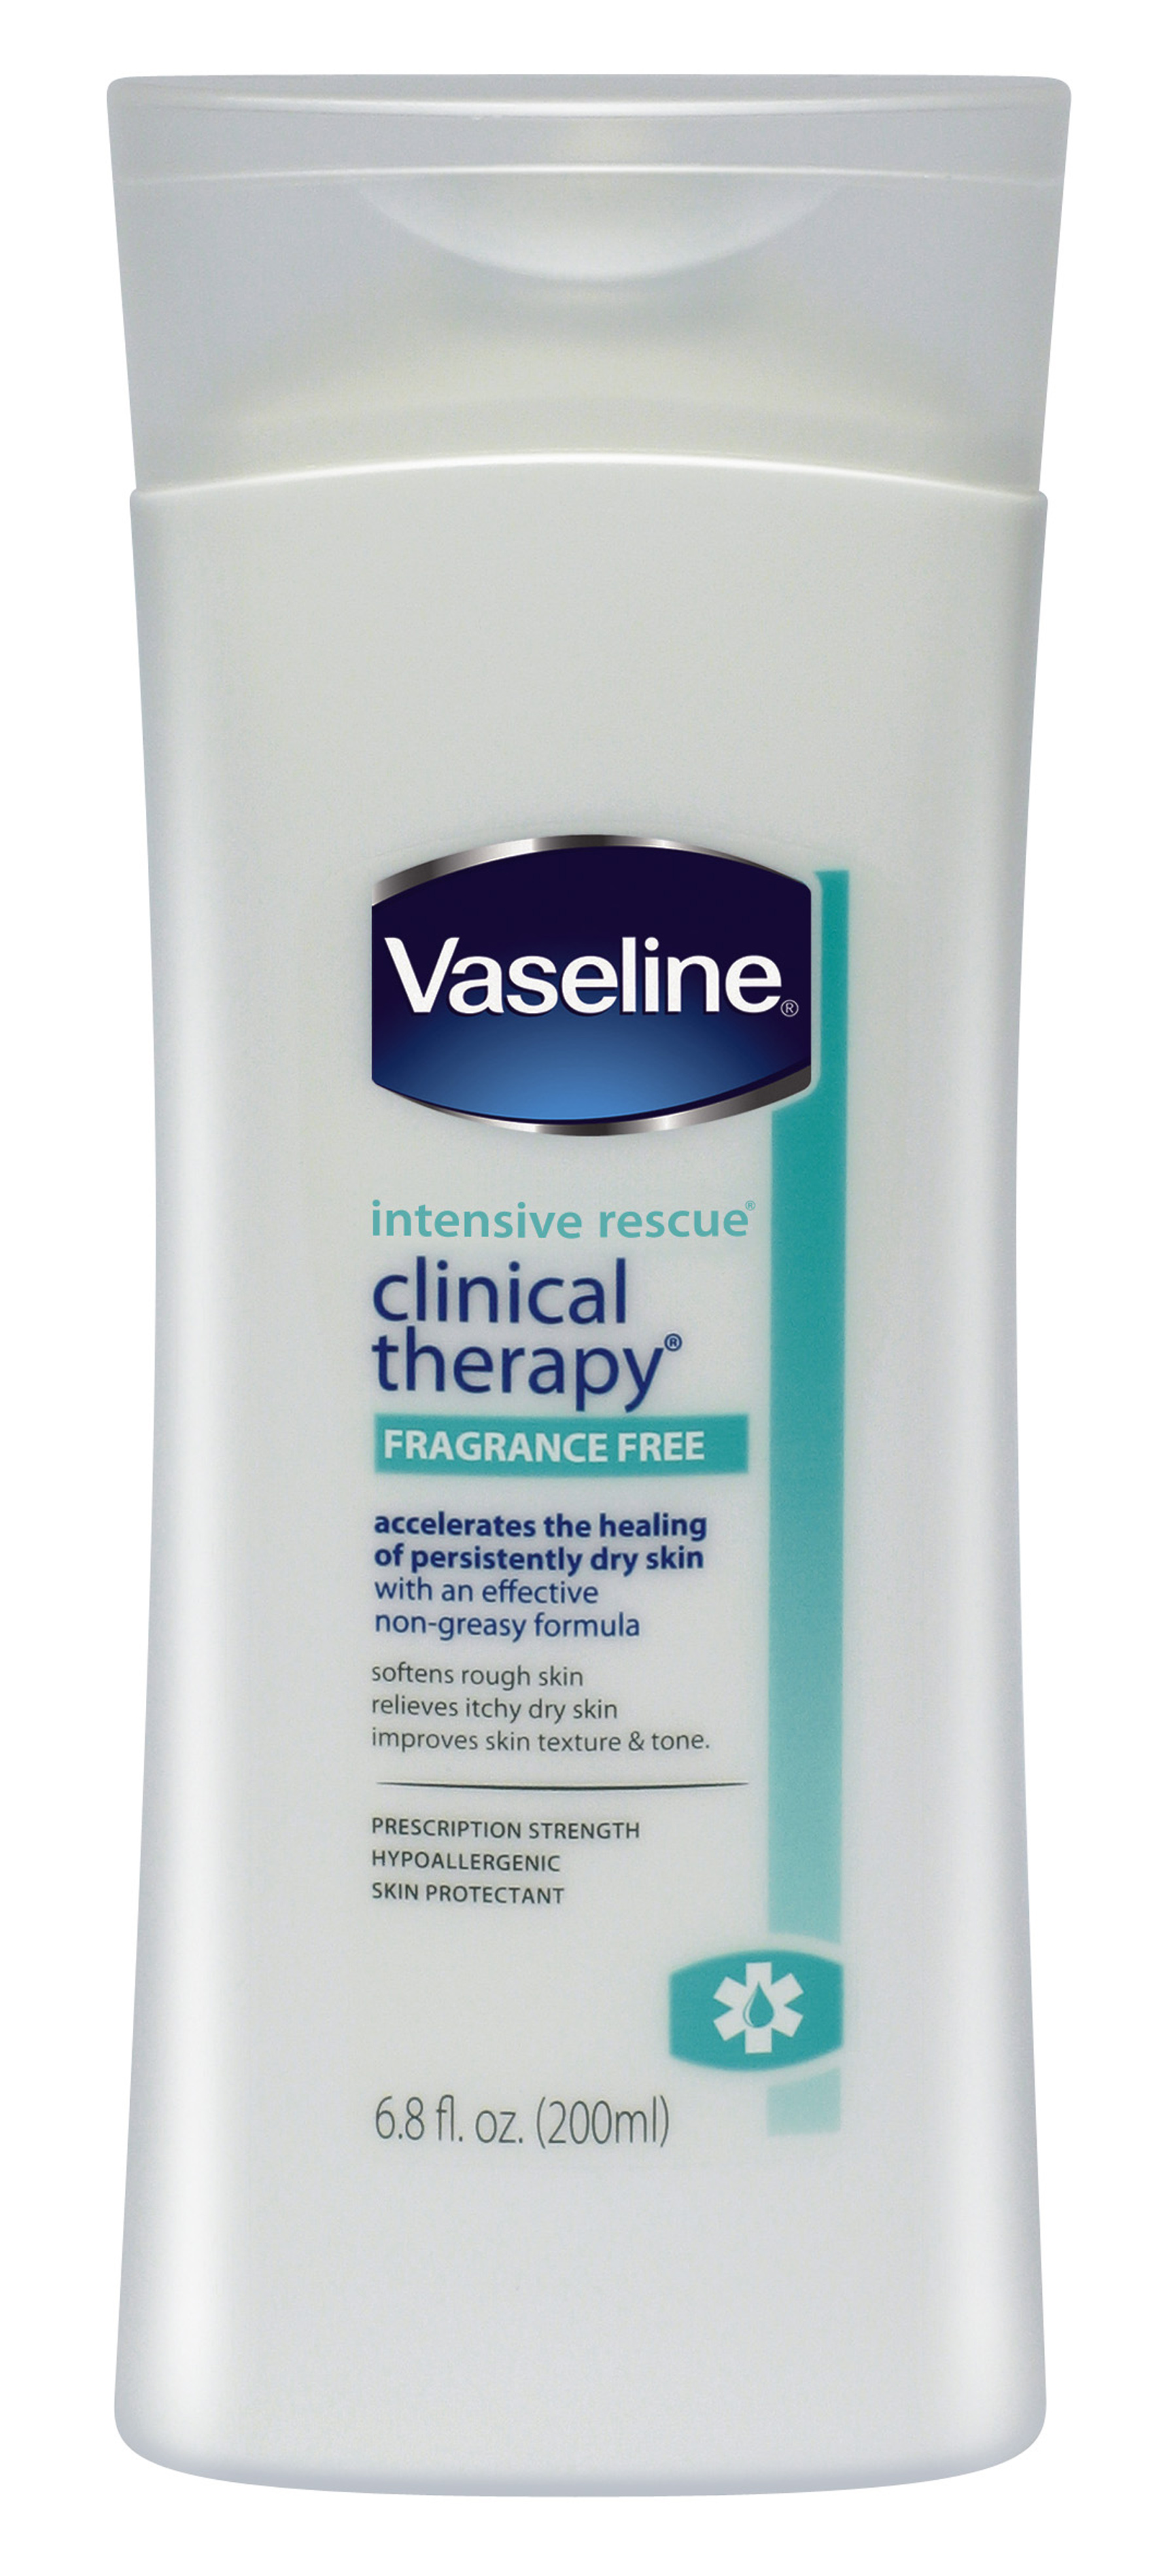 Vaseline clinical therapy